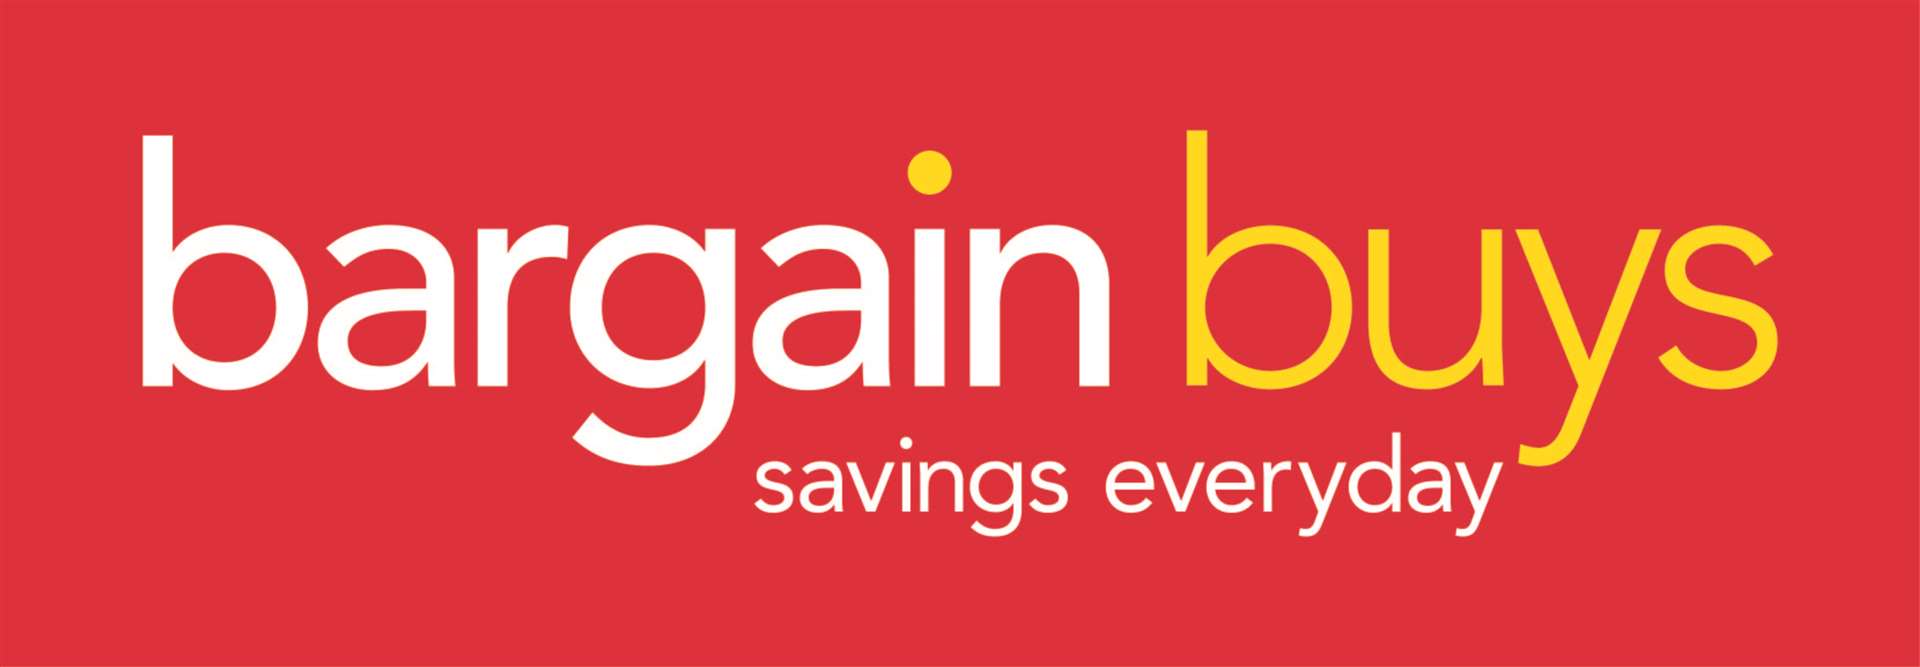 Bargain Buys will create 20 new retail jobs for people in the area